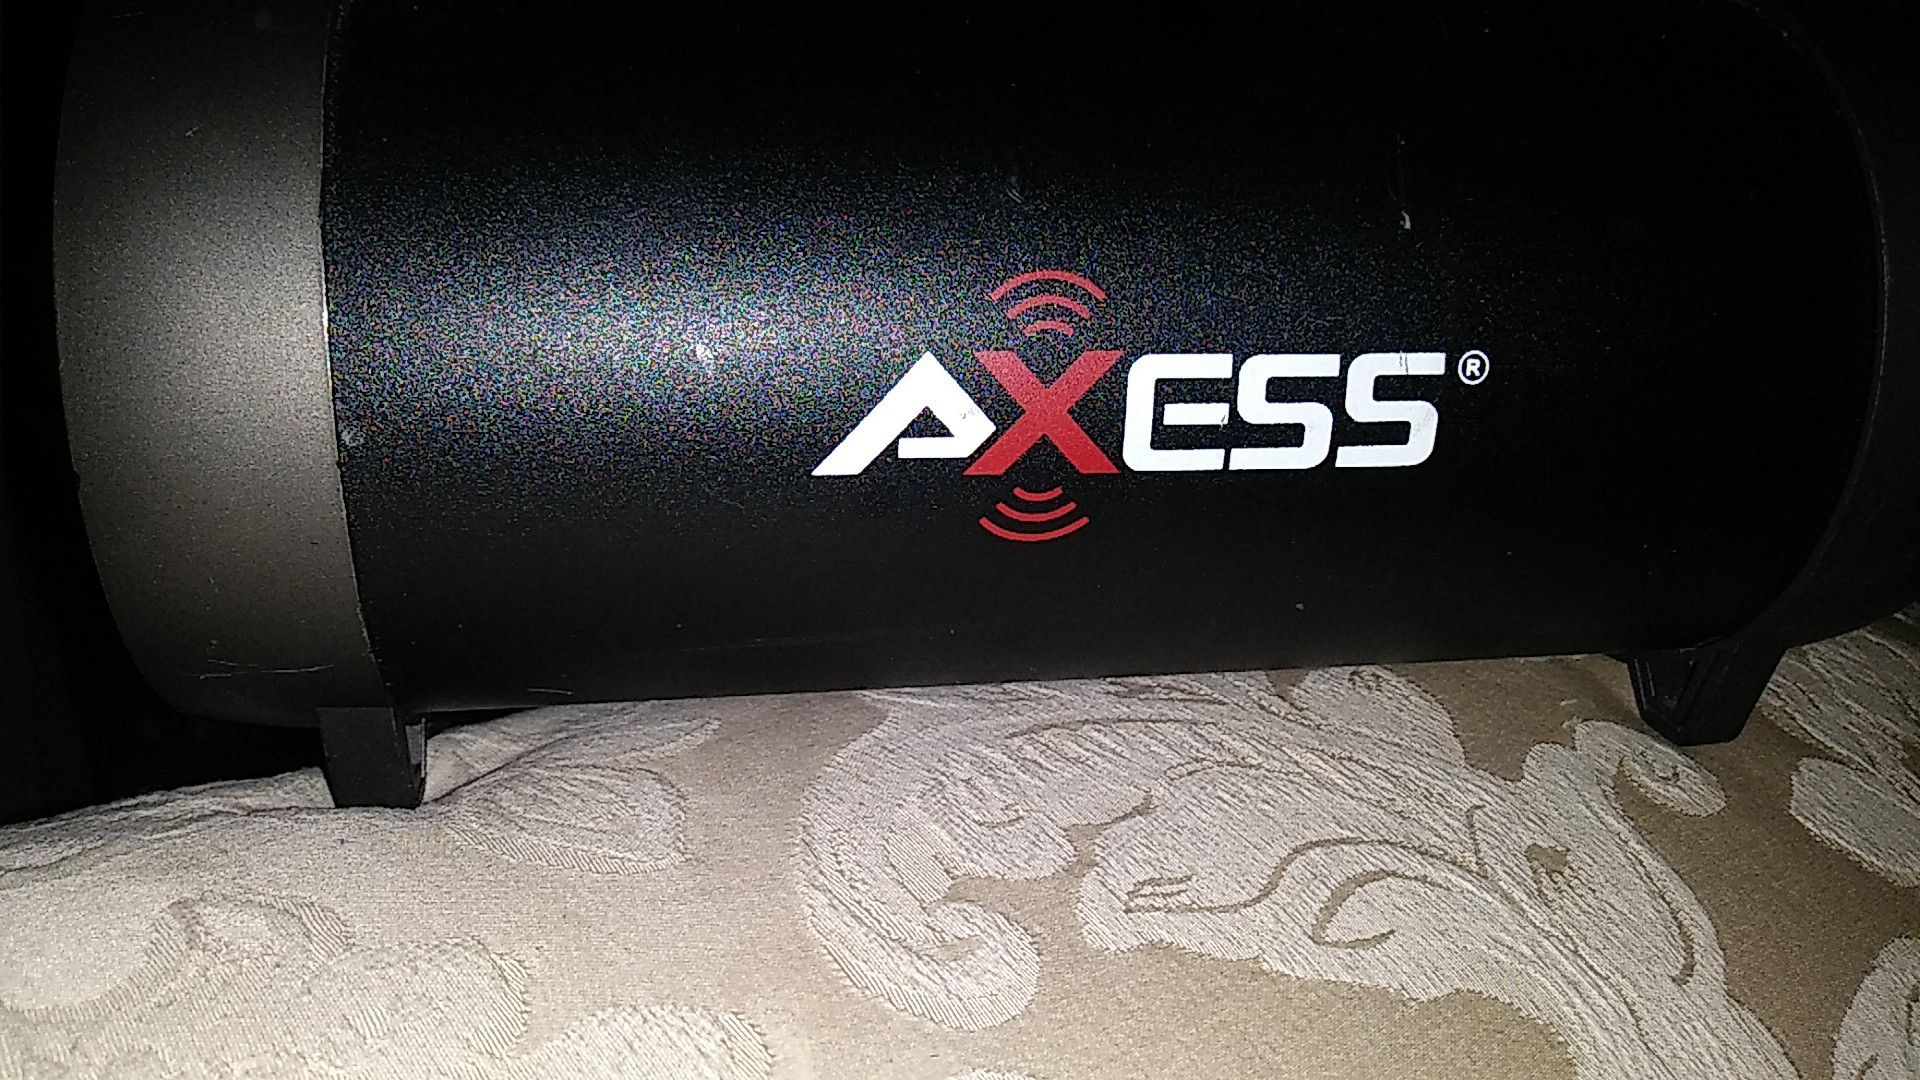 Axess blutooth speaker with built in equalizer. Multimode.